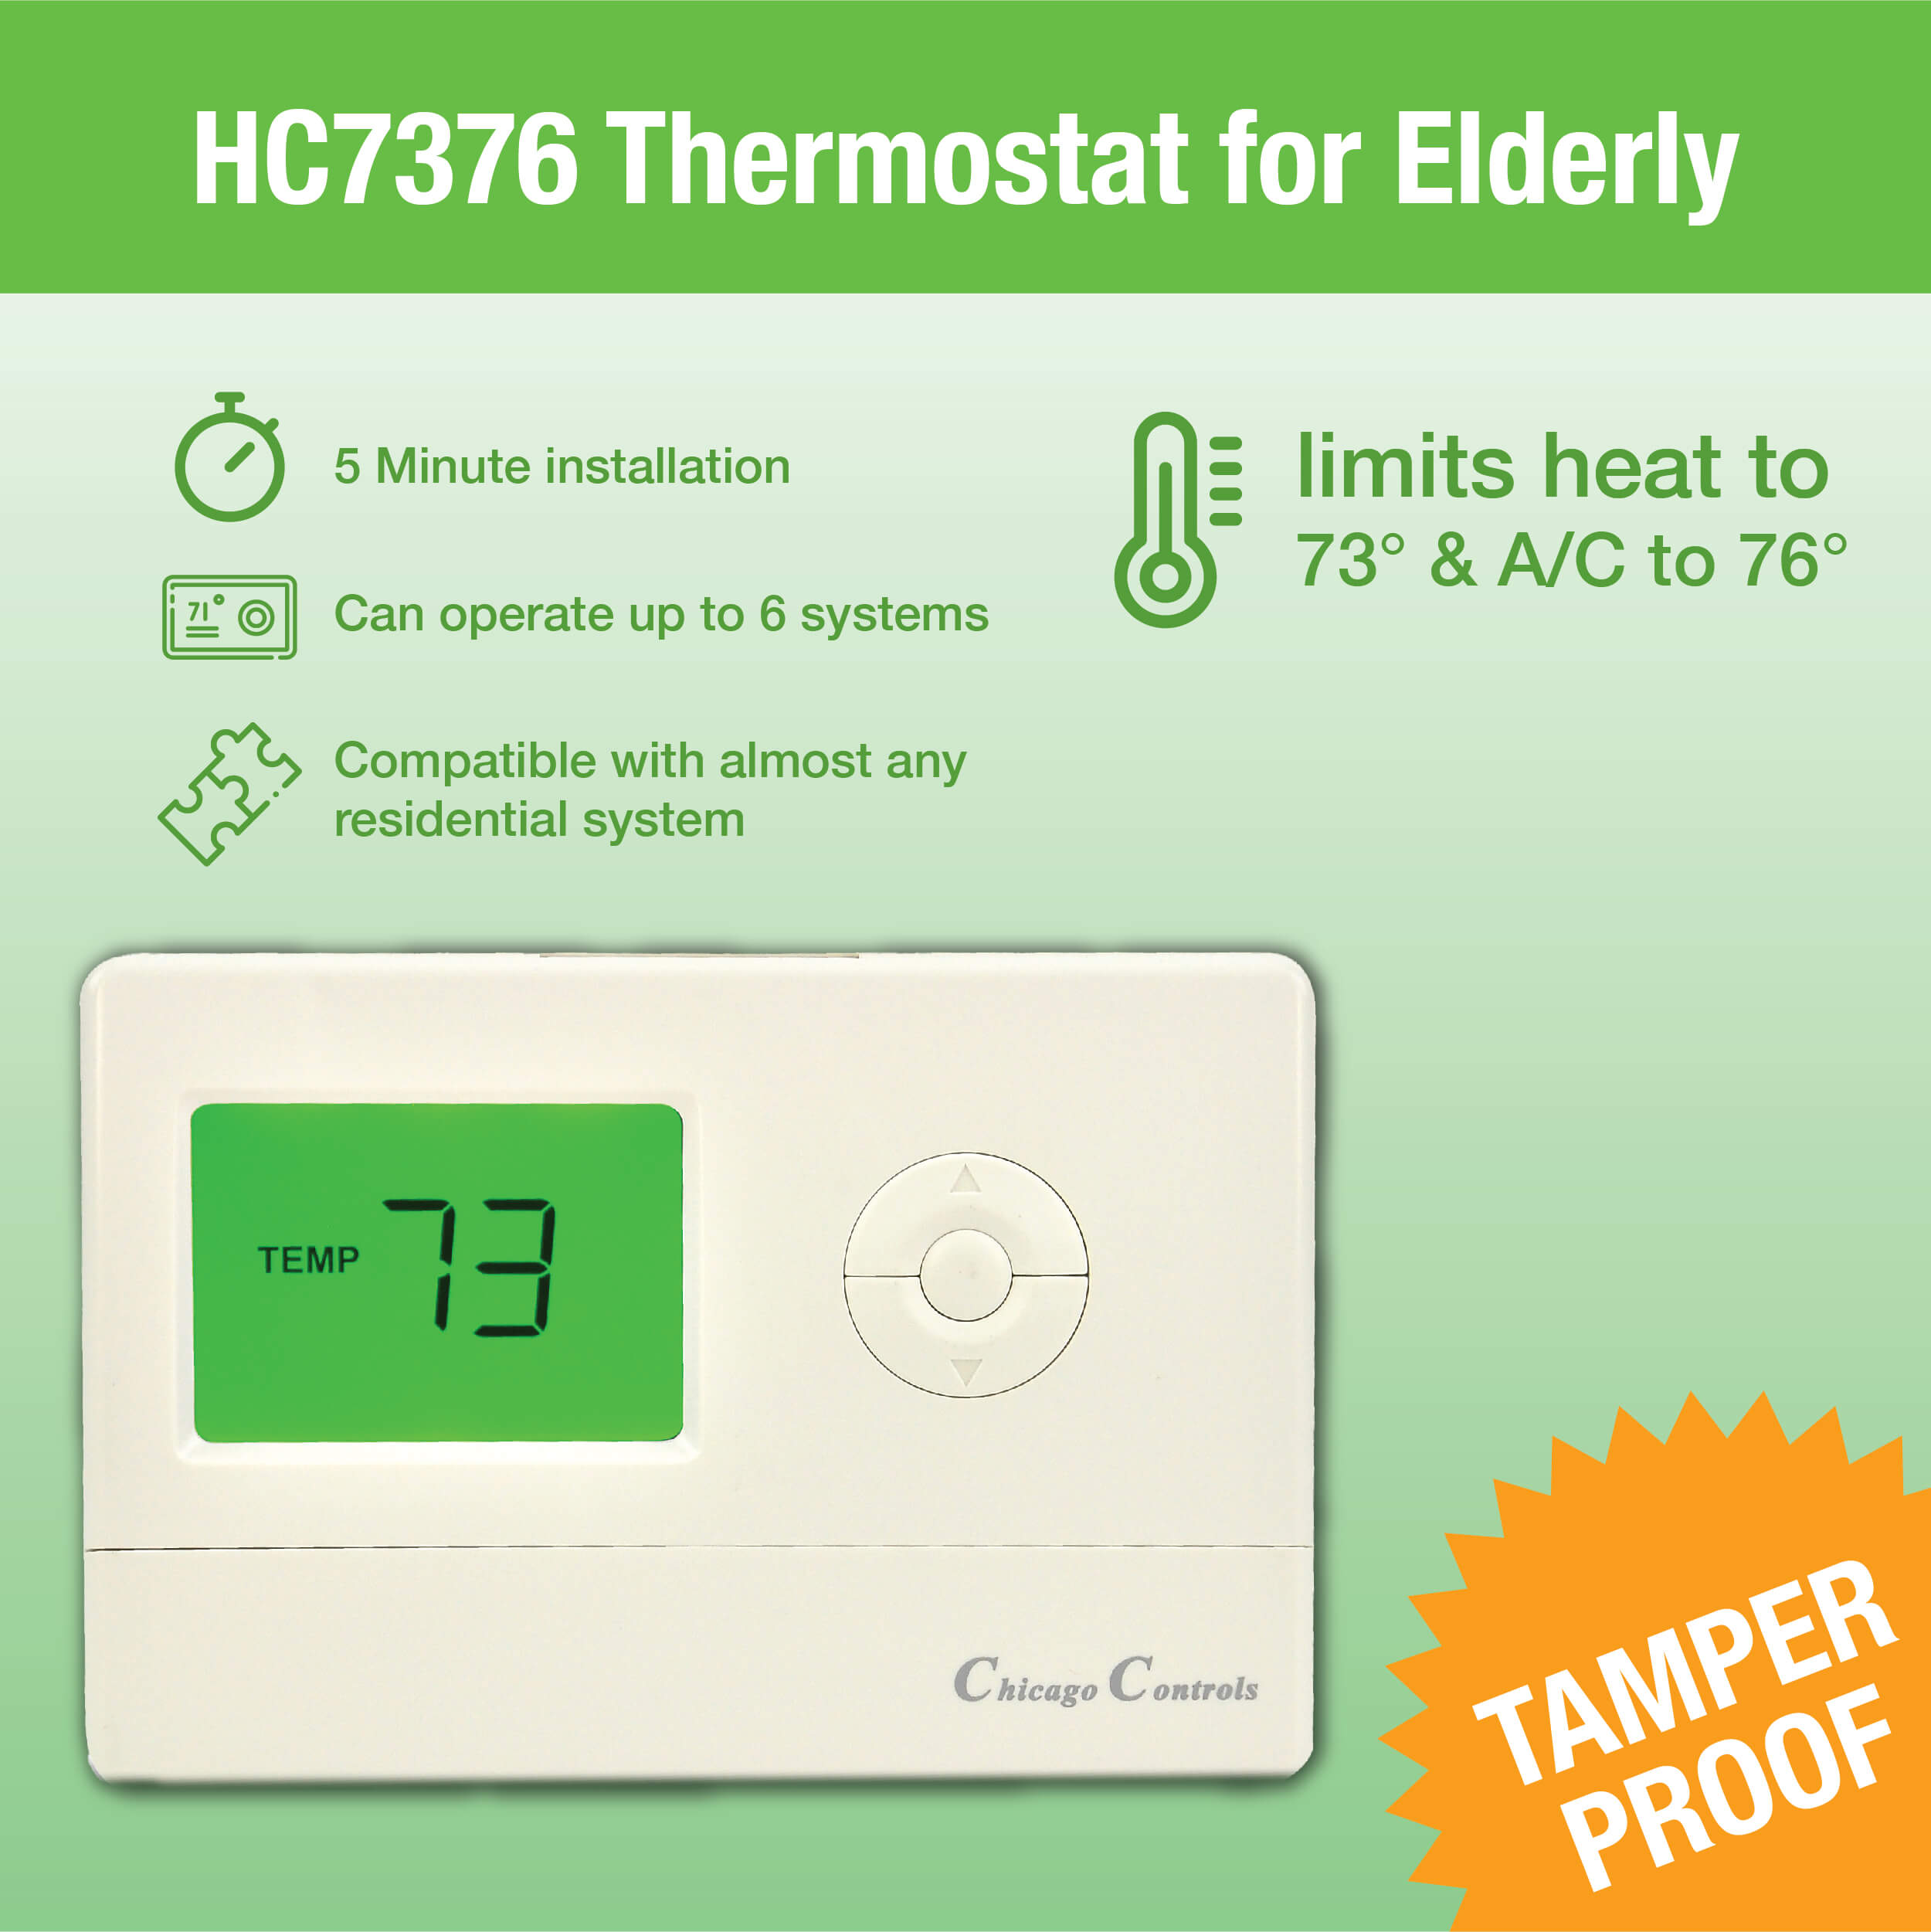 Overview of the Thermostat for Elderly